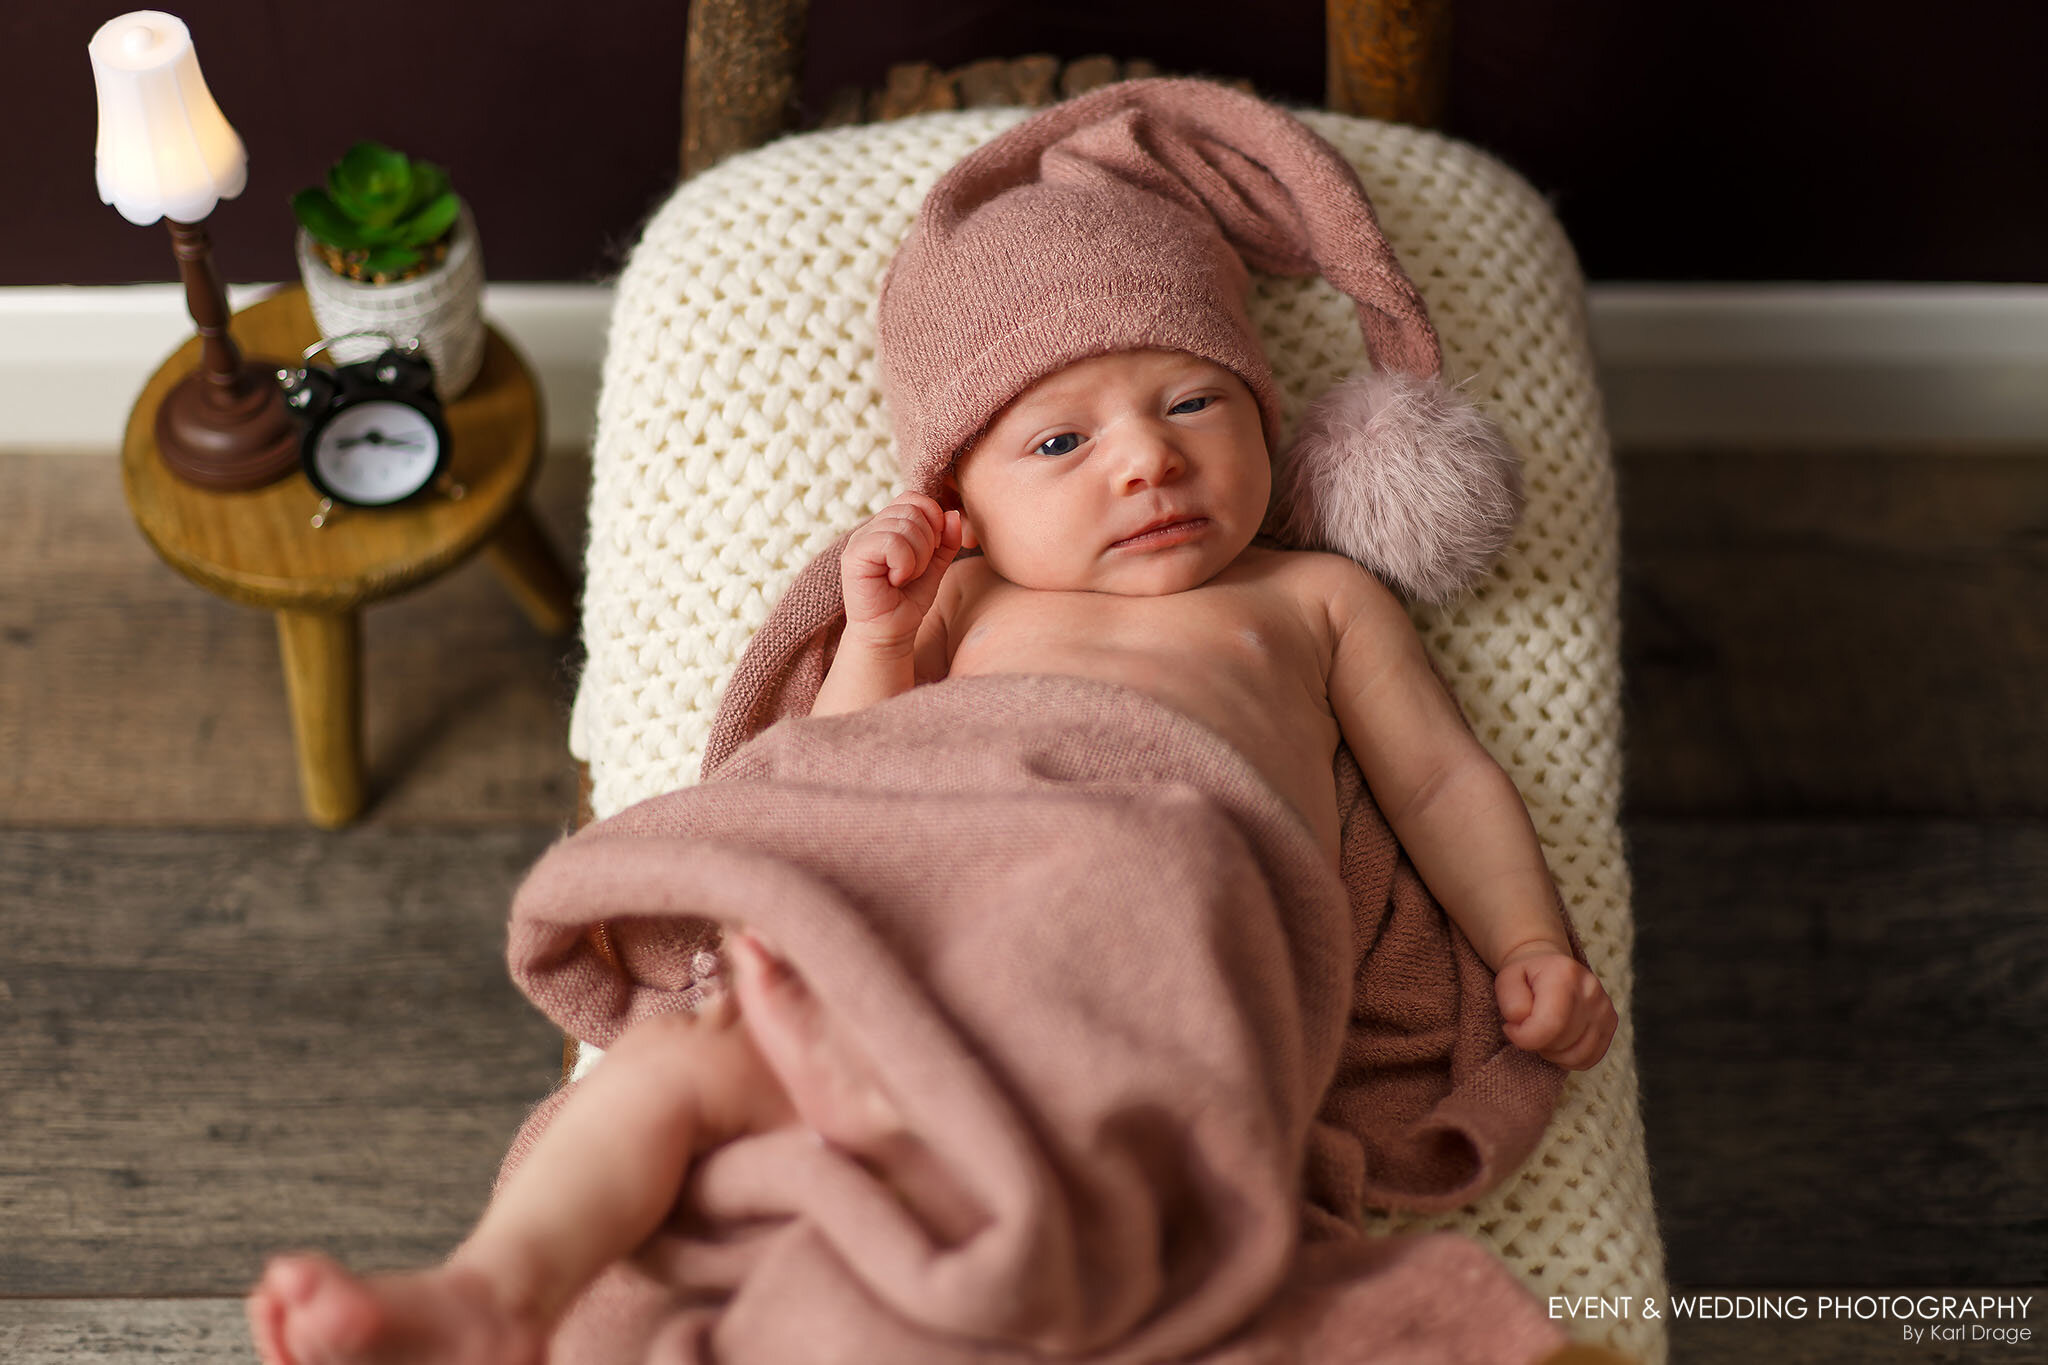 A newborn baby girl lays wide awake in a rustic wooden bed during her photo shoot with Kettering newborn photographer Karl Drage